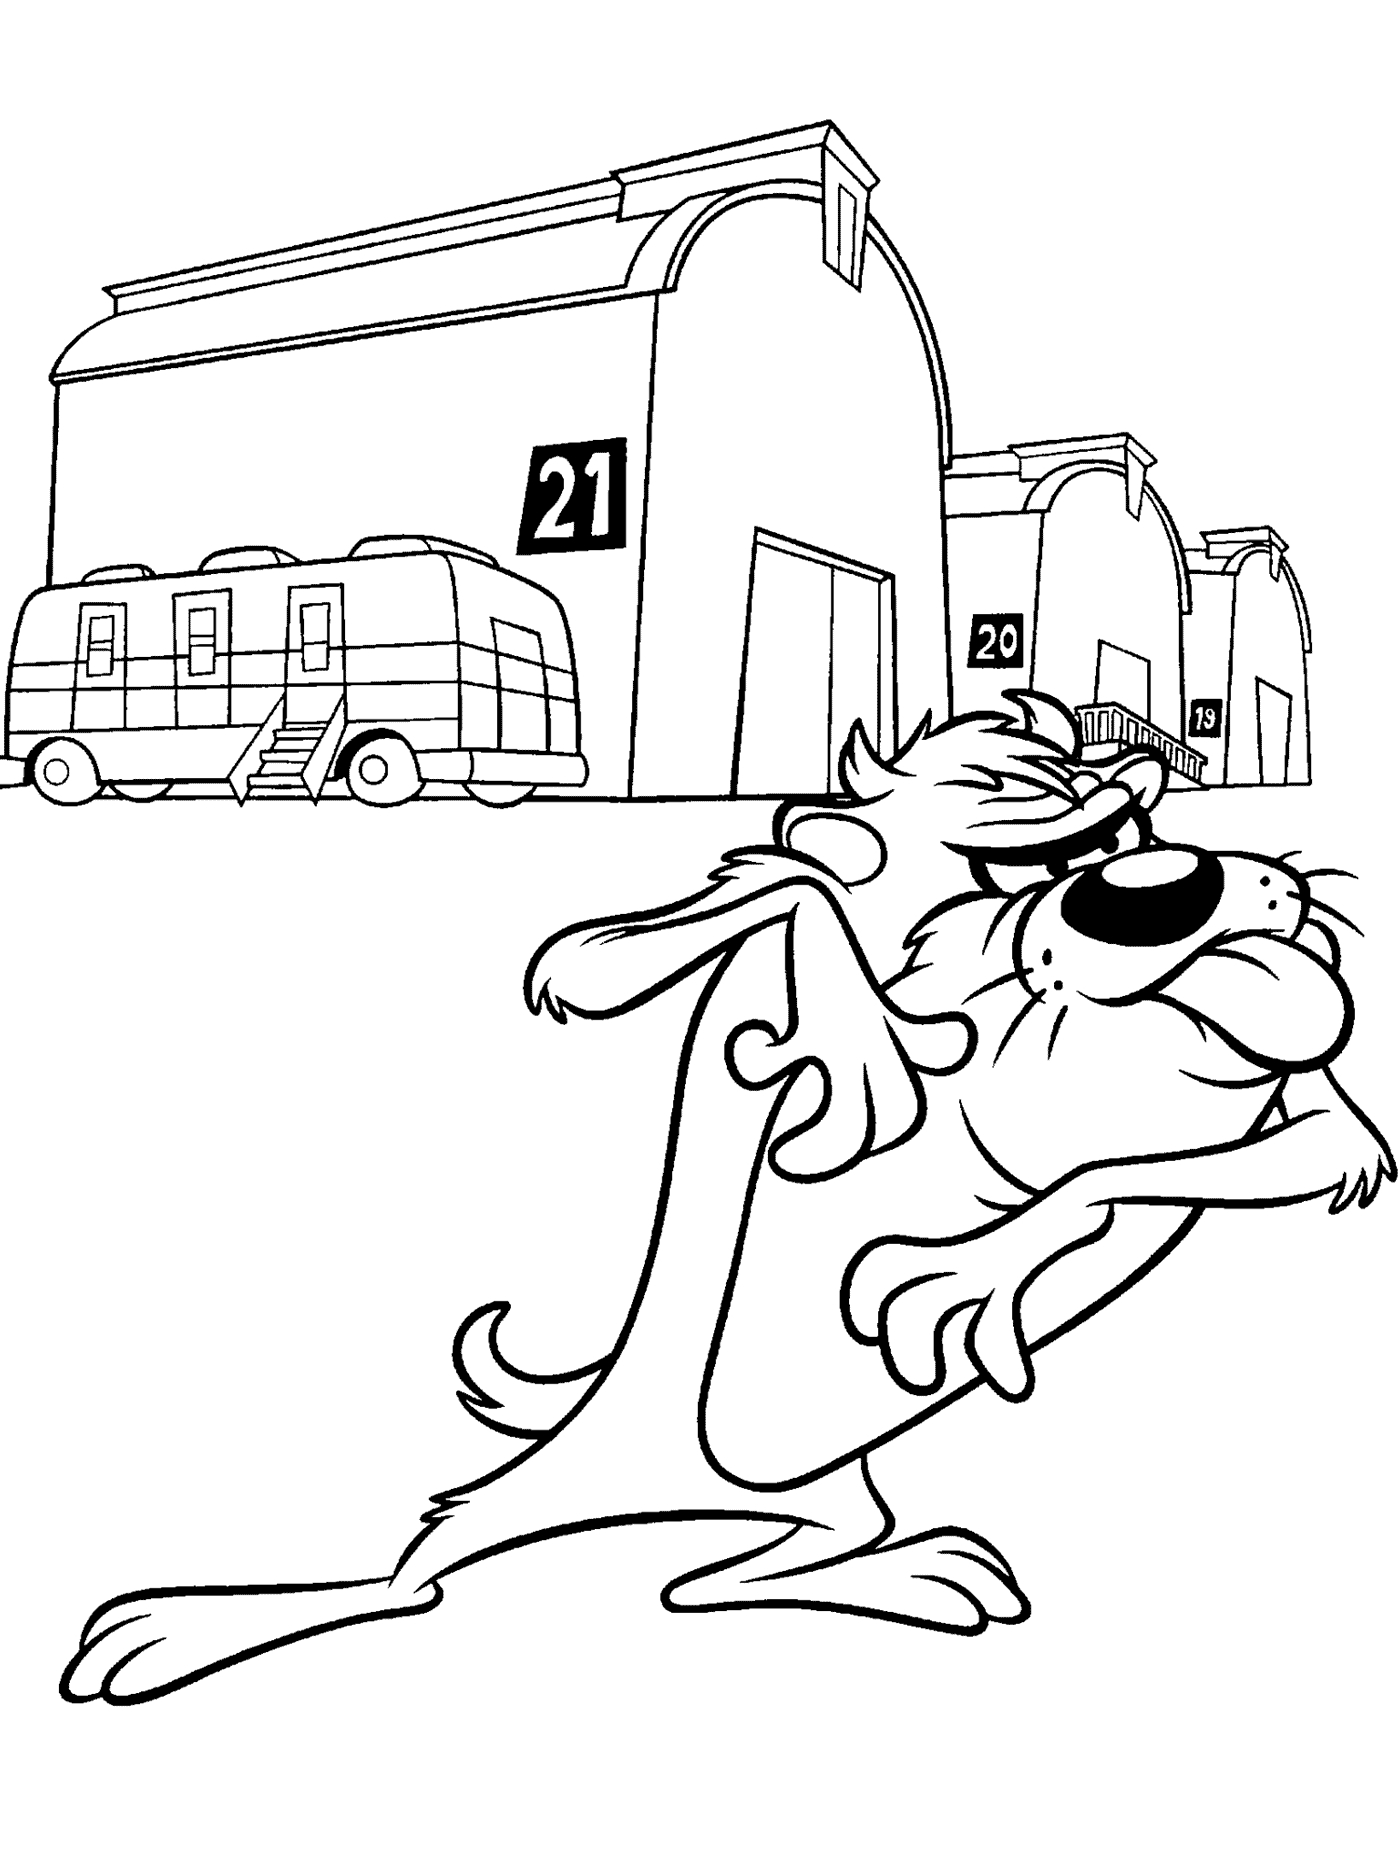 Taz Cartoon Coloring Pages Taz The Tasmanian Devil Coloring Page Looney Tunes Spot Coloring